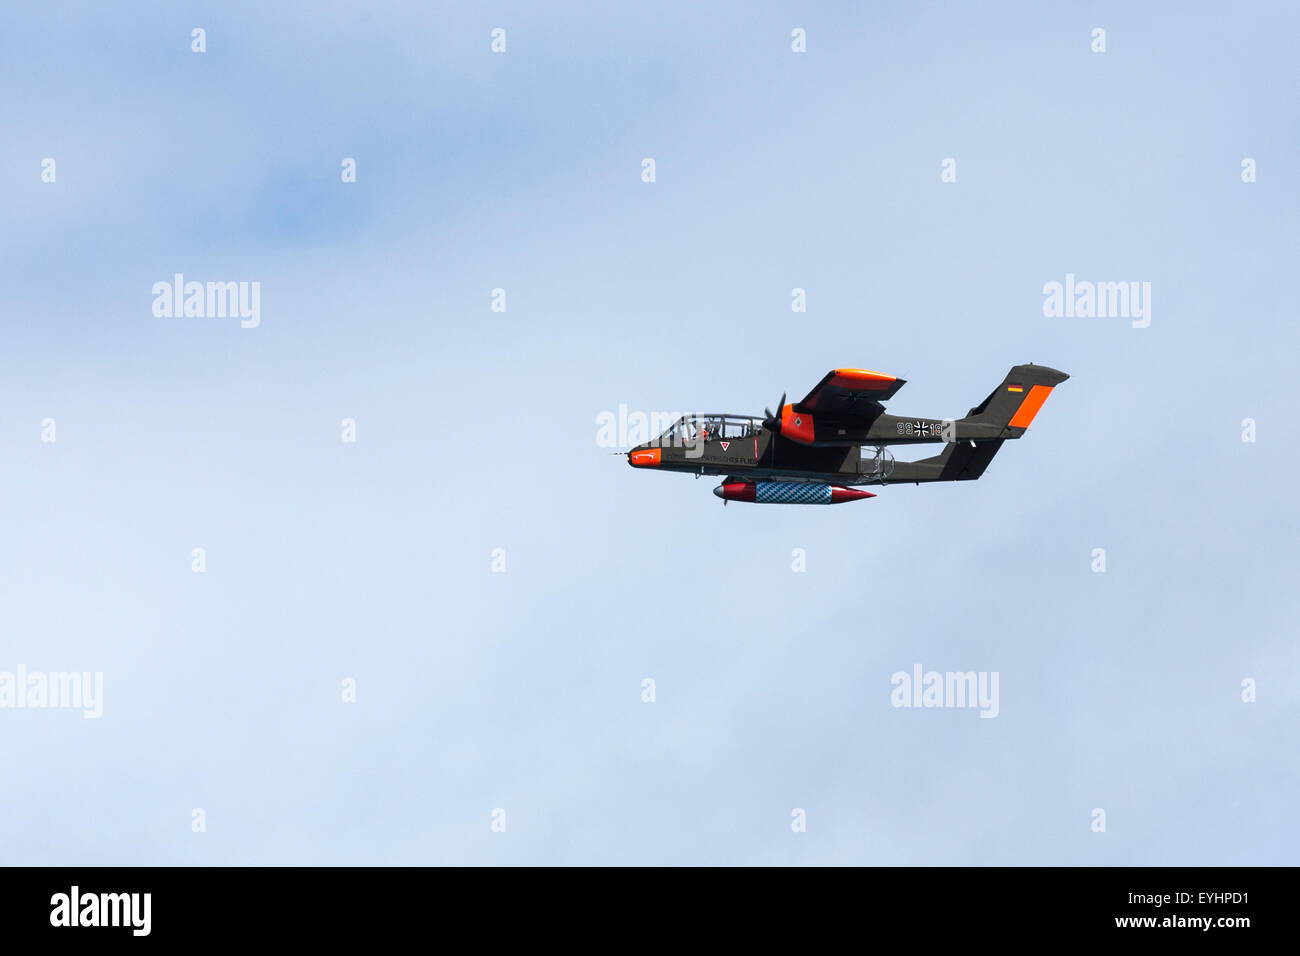 The North American Rockwell OV-10 Bronco is a turboprop light attack and observation aircraft. Stock Photo